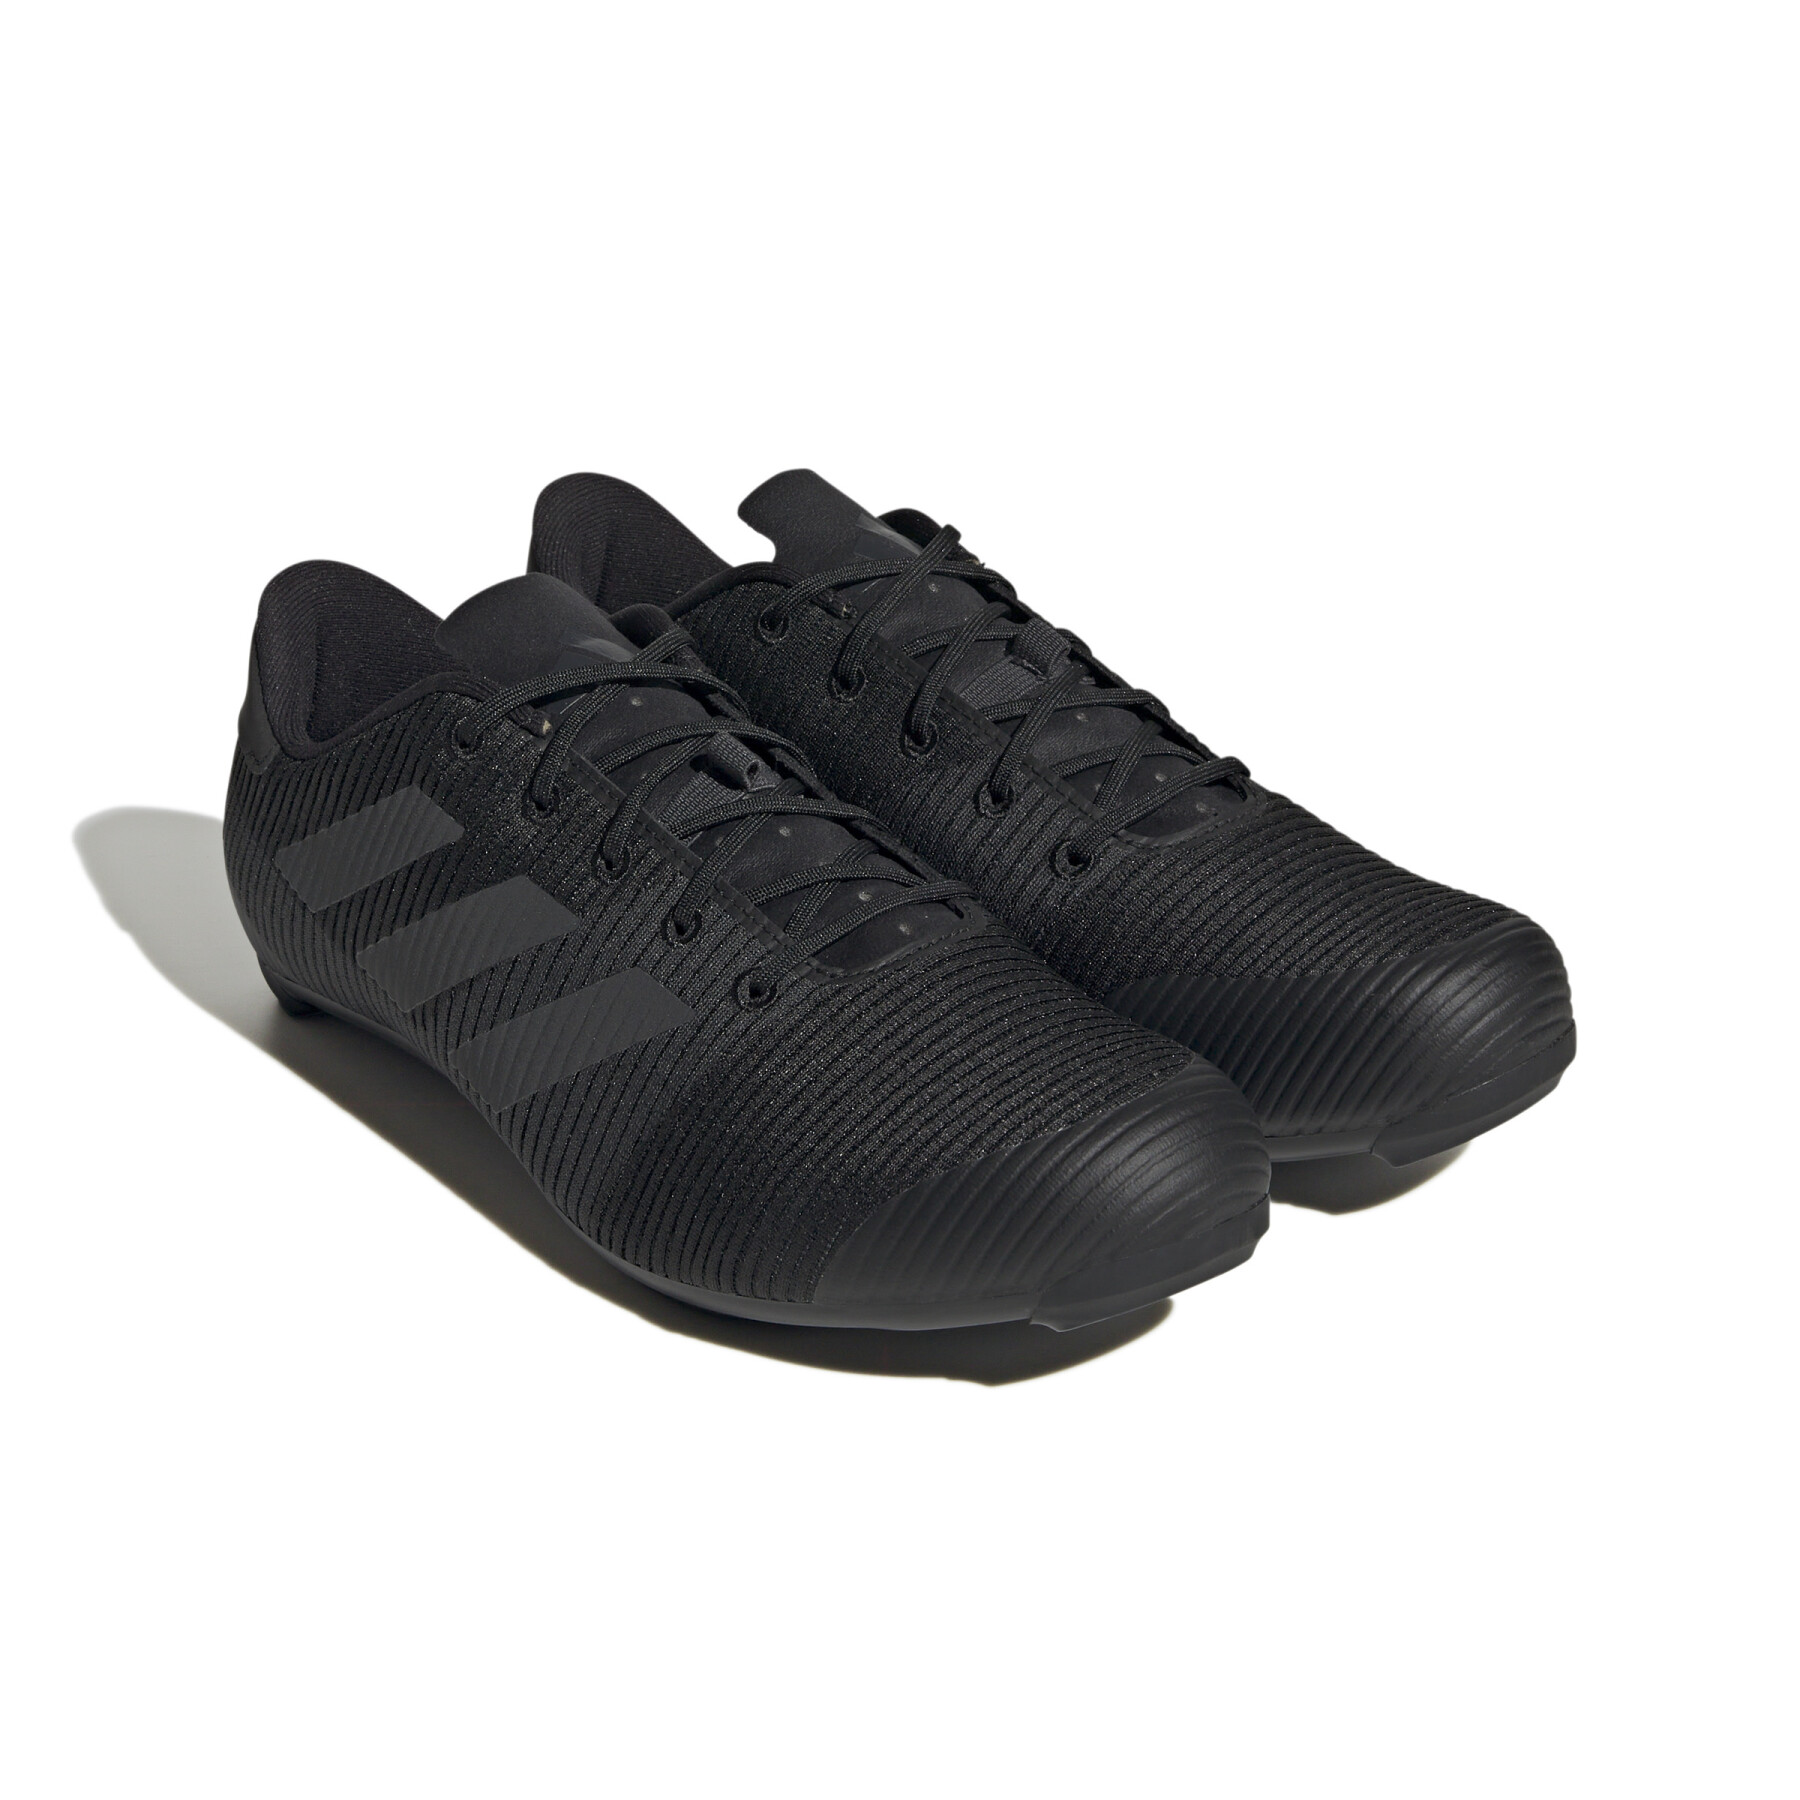 Children's cycling shoes adidas The Road 2.0